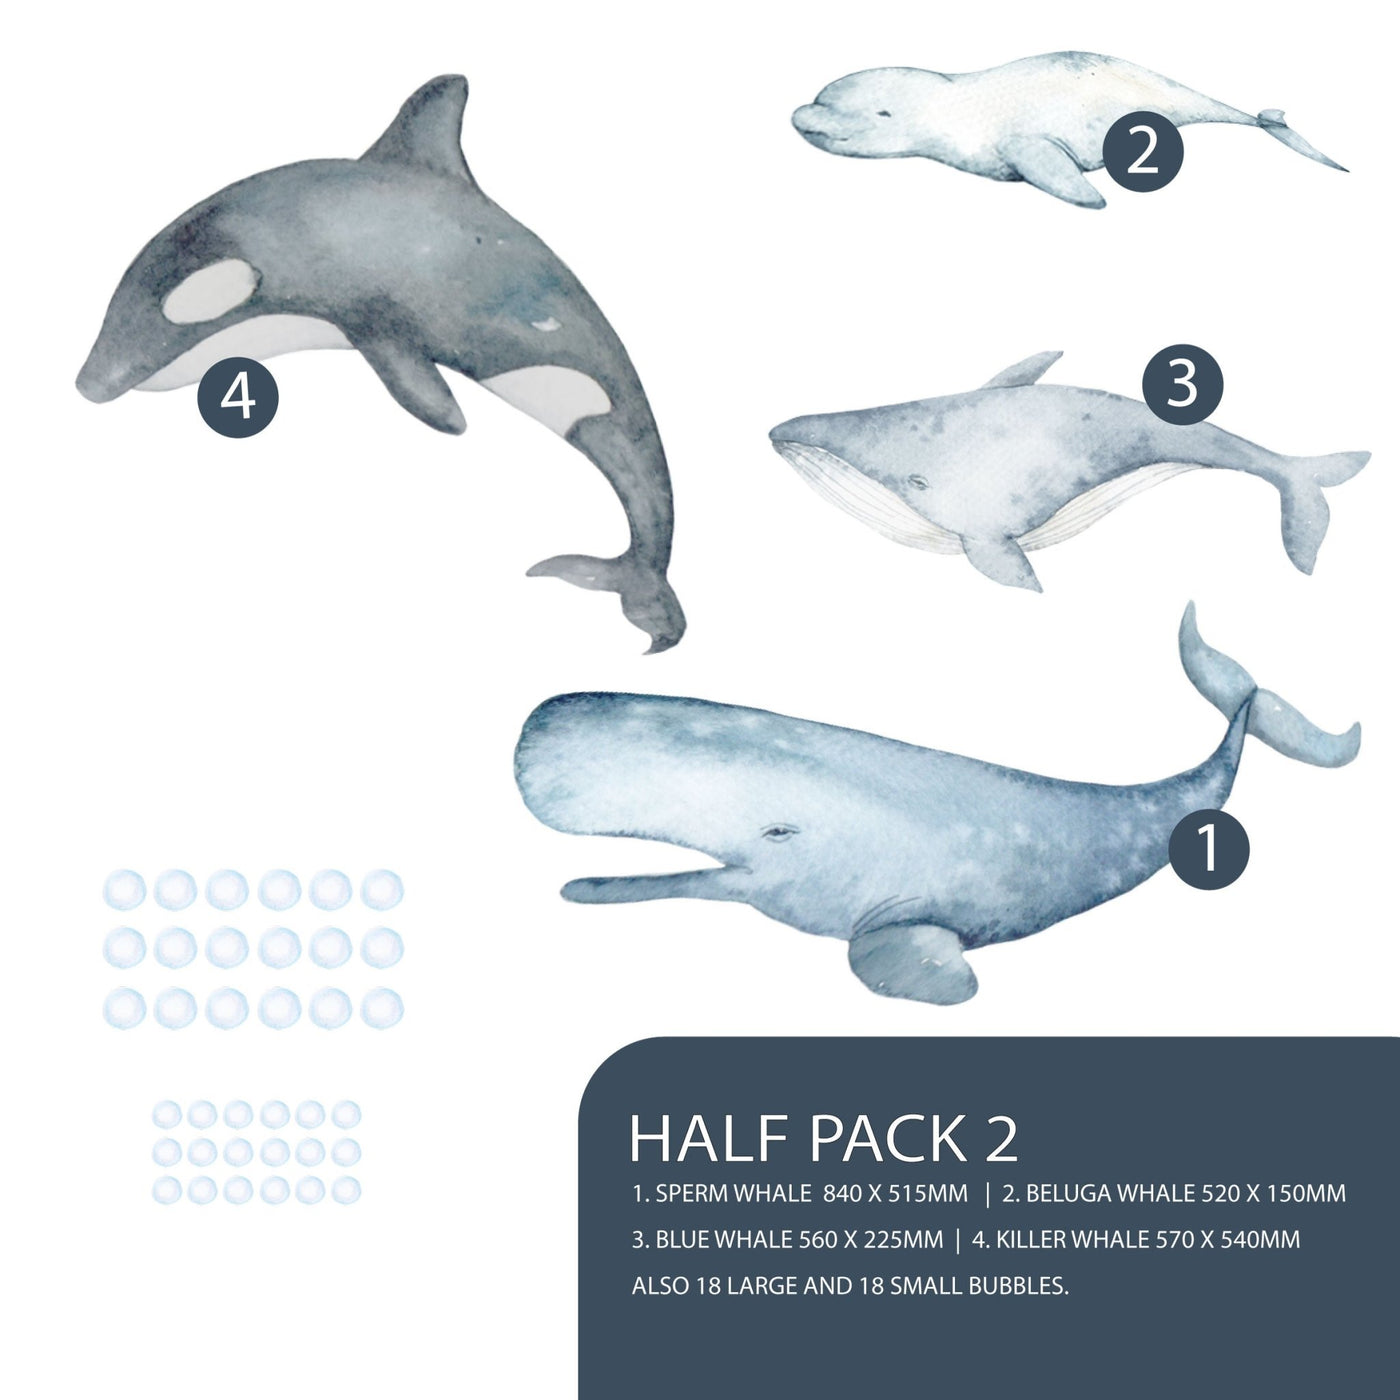 Whales and Bubbles Wall Decals - Jack Harry and Ollie